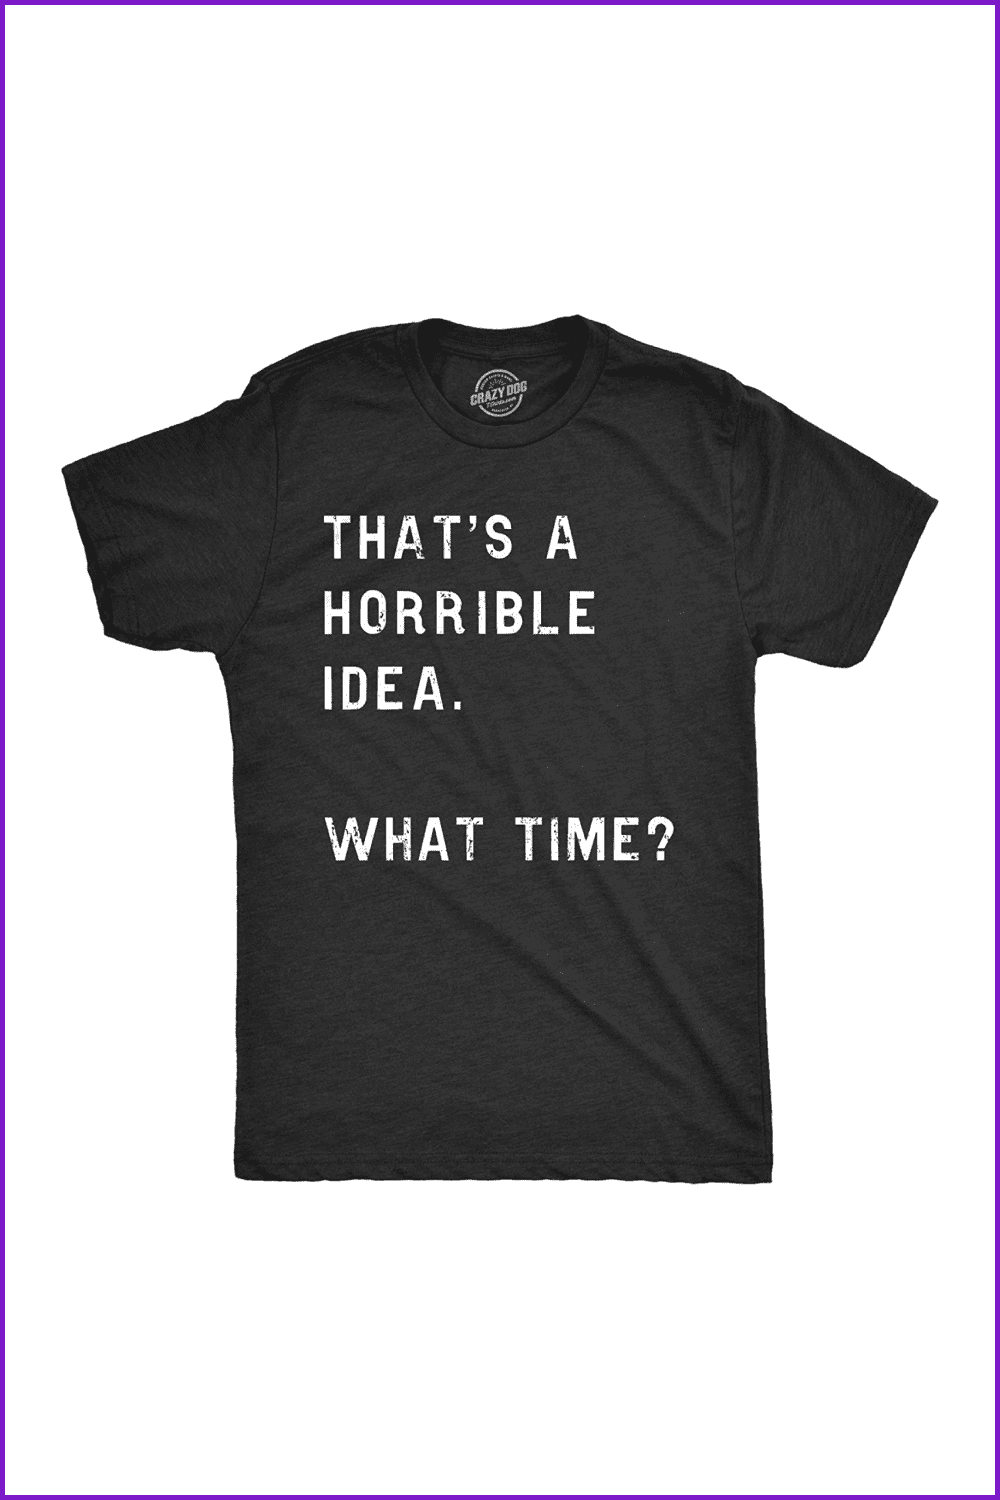 Crazy Dog T-Shirts Mens That’s A Horrible Idea What Time T Shirt Funny Drinking Sarcastic Humor Tee.